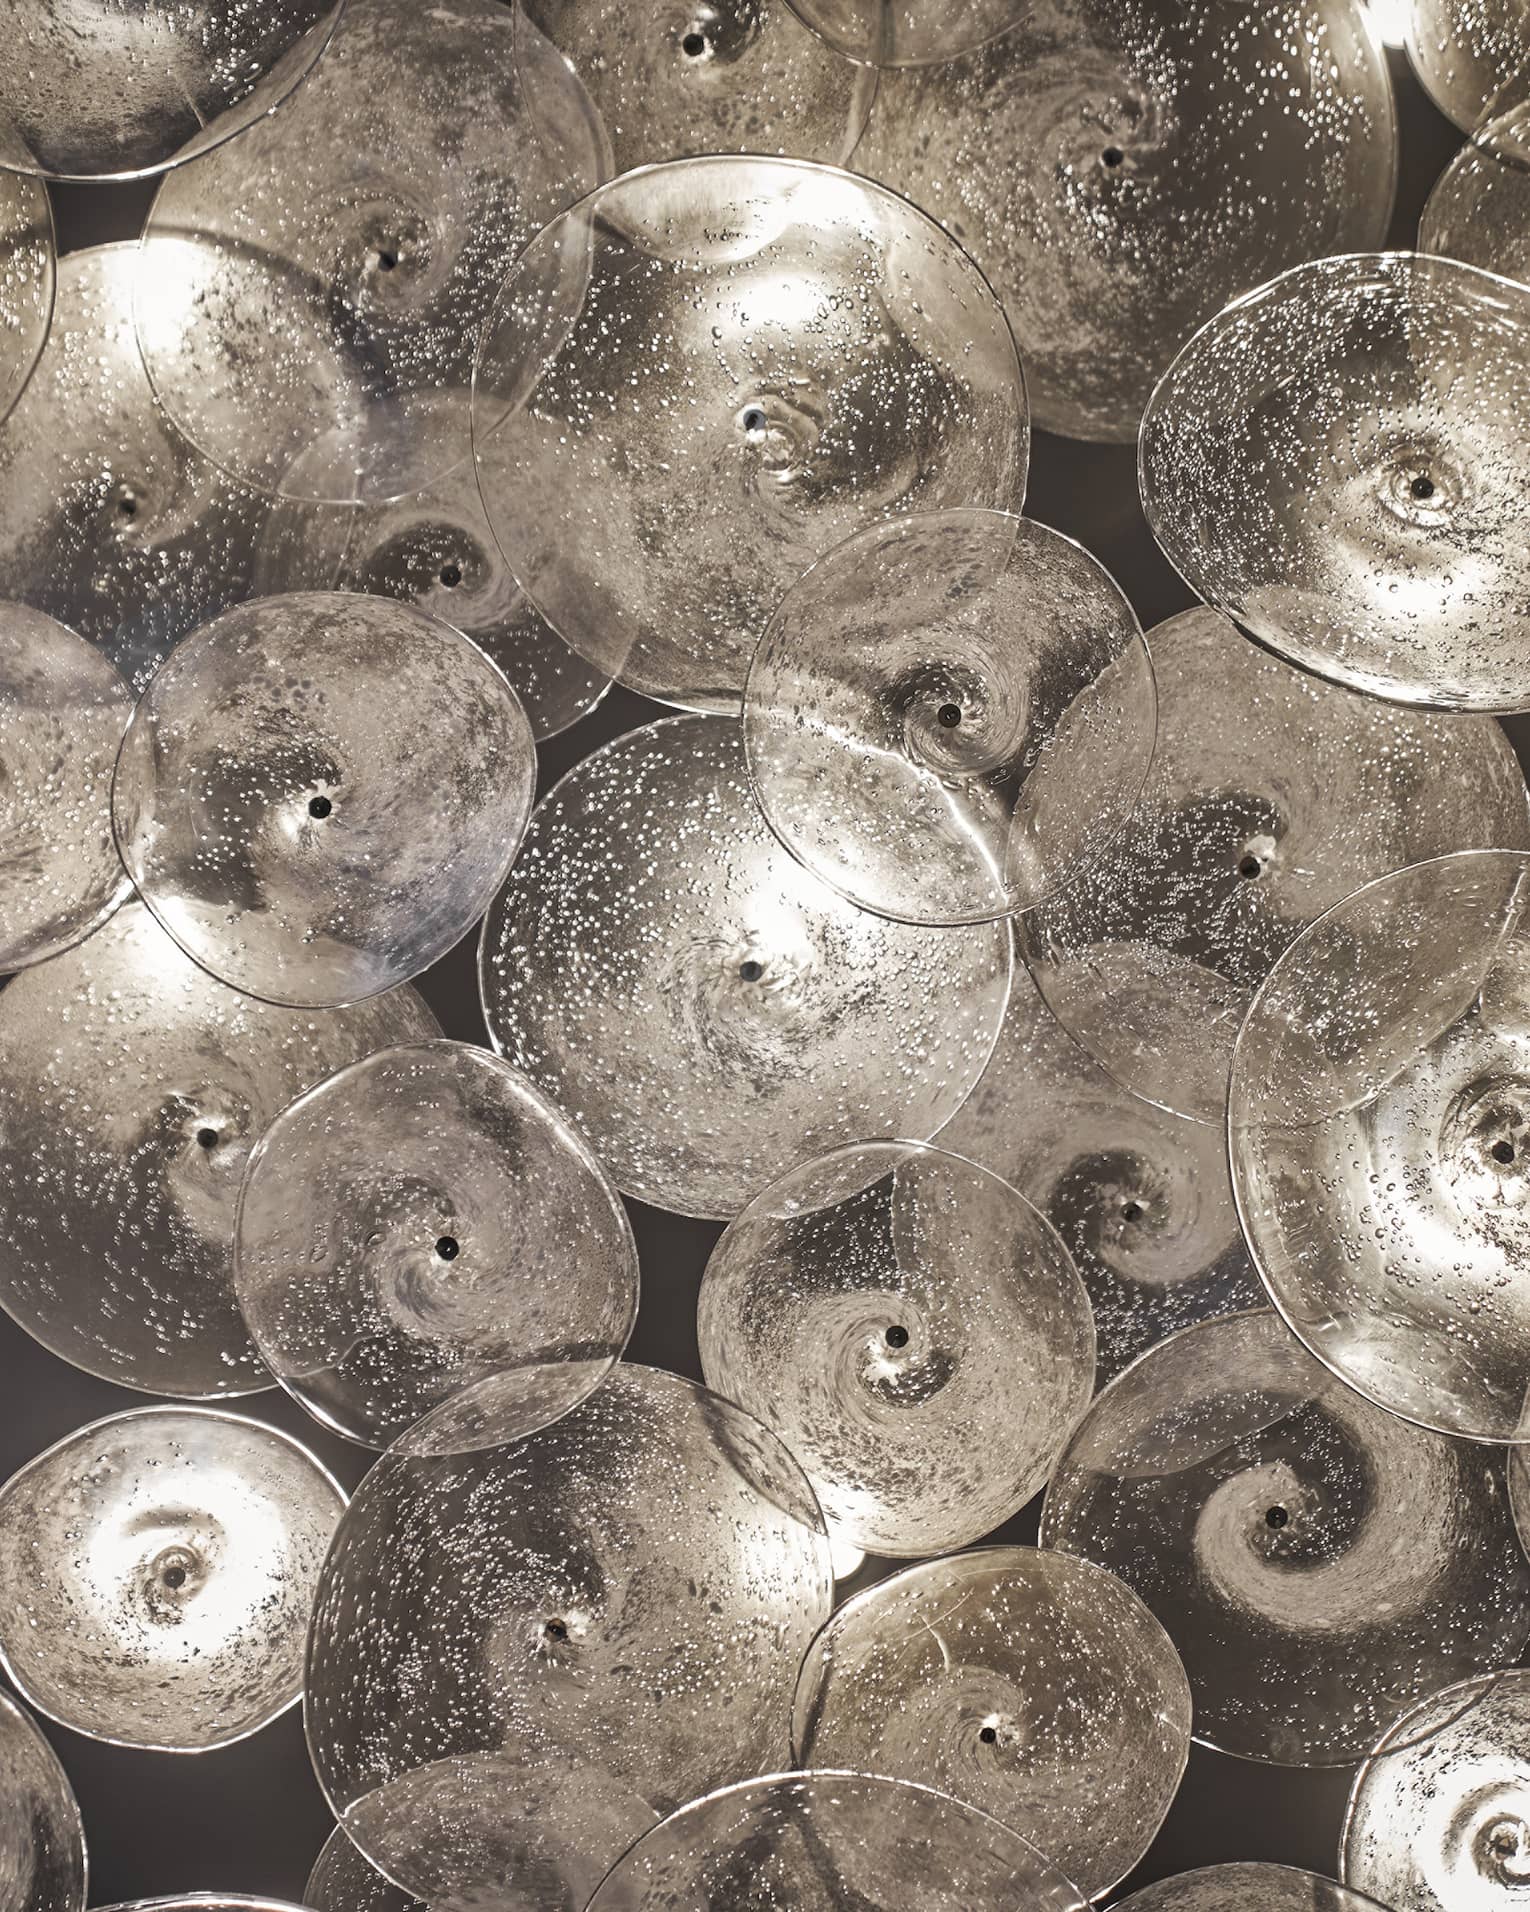 Glass sculptures, clear discs with swirls